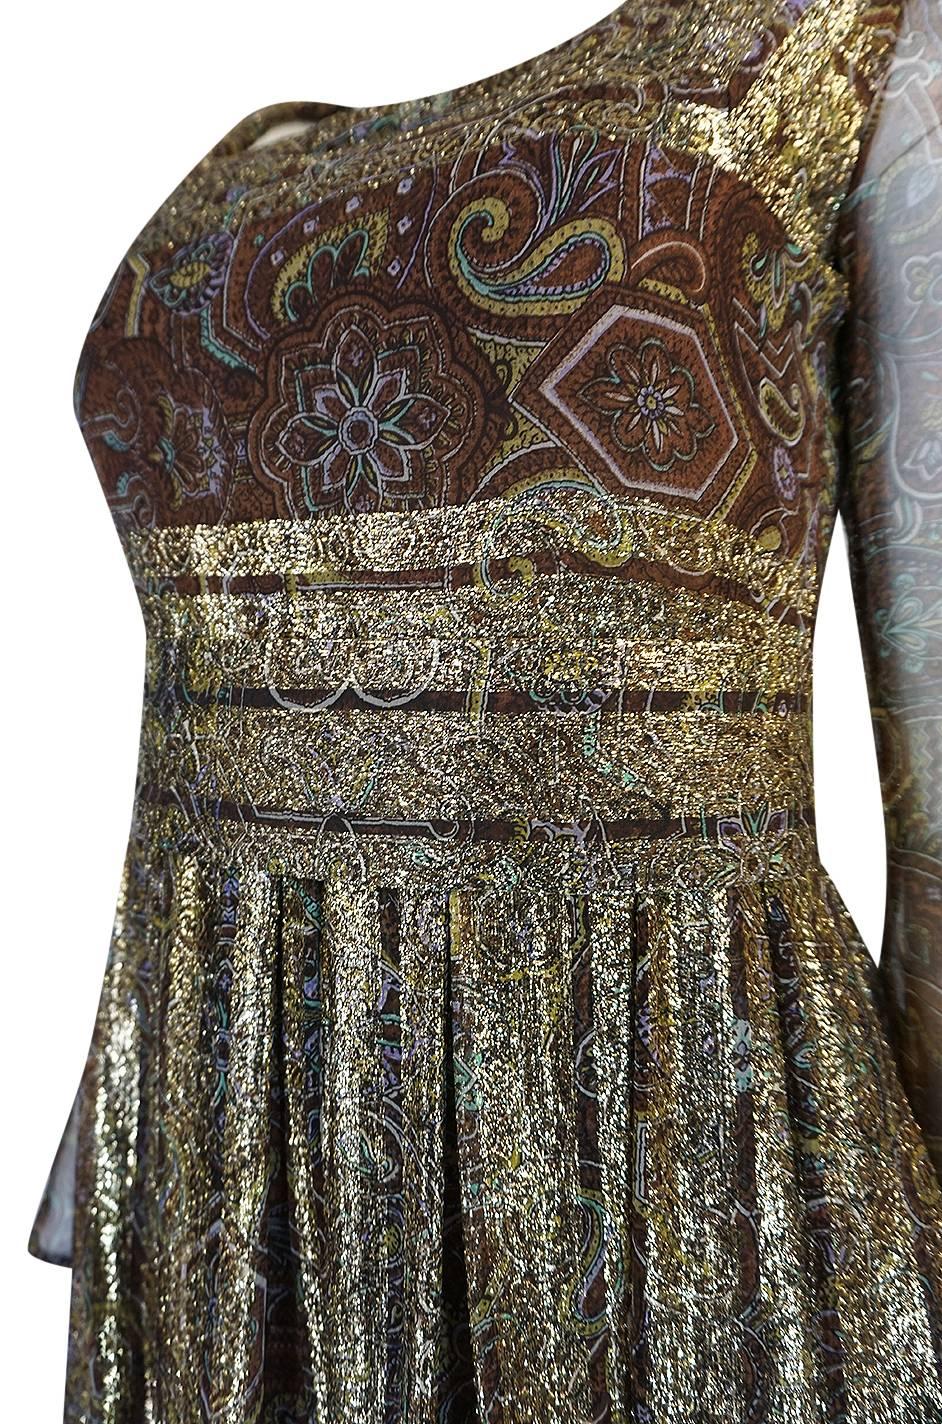 Christian Dior by Marc Bohan Demi-Couture Gold and Printed Silk Dress, c 1968 5